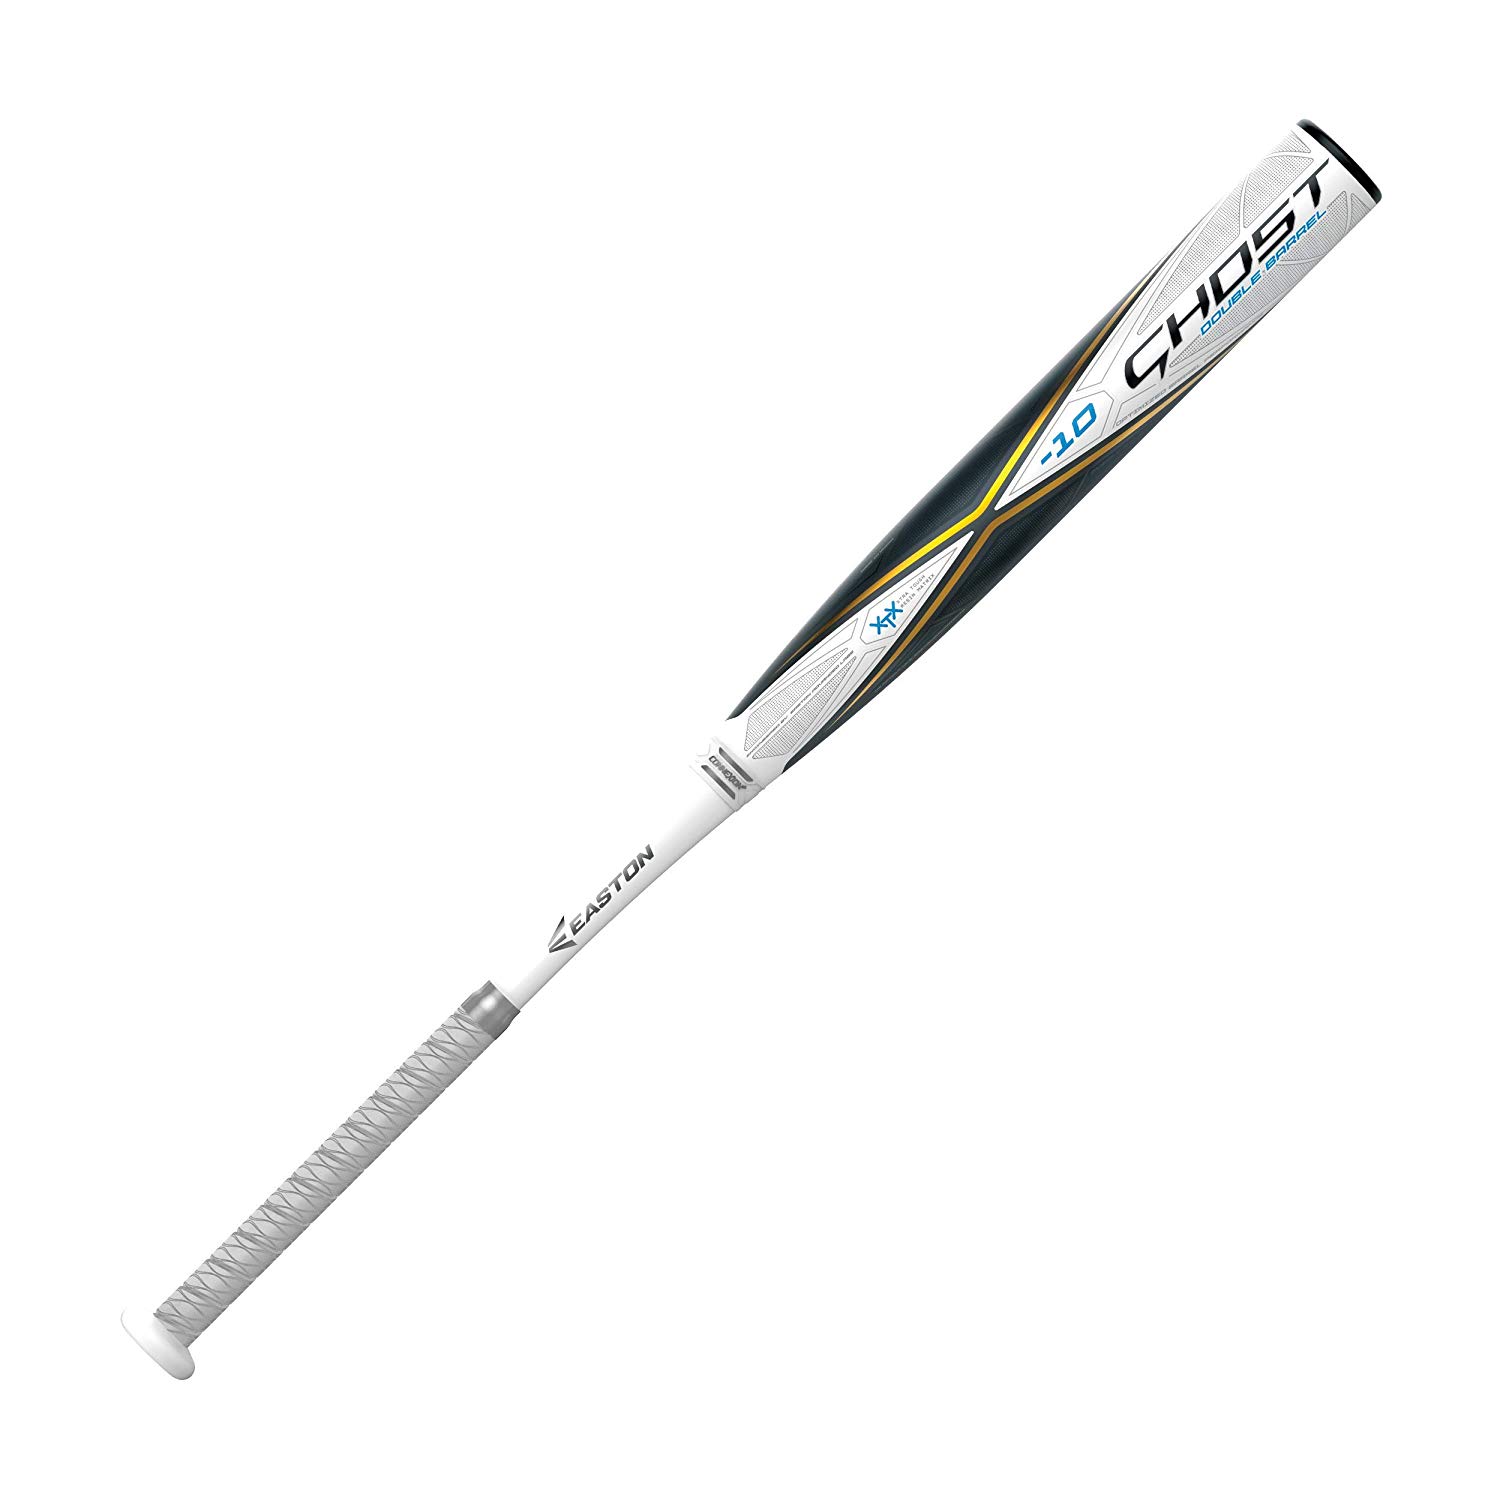 easton-ghost-11-fastpitch-softball-bat-2020-dual-stamp-32-inch-21-oz FP20GH112020-3221 Easton 628412264010 Patent-pending Double Barrel construction is the ultimate combination of feel pop